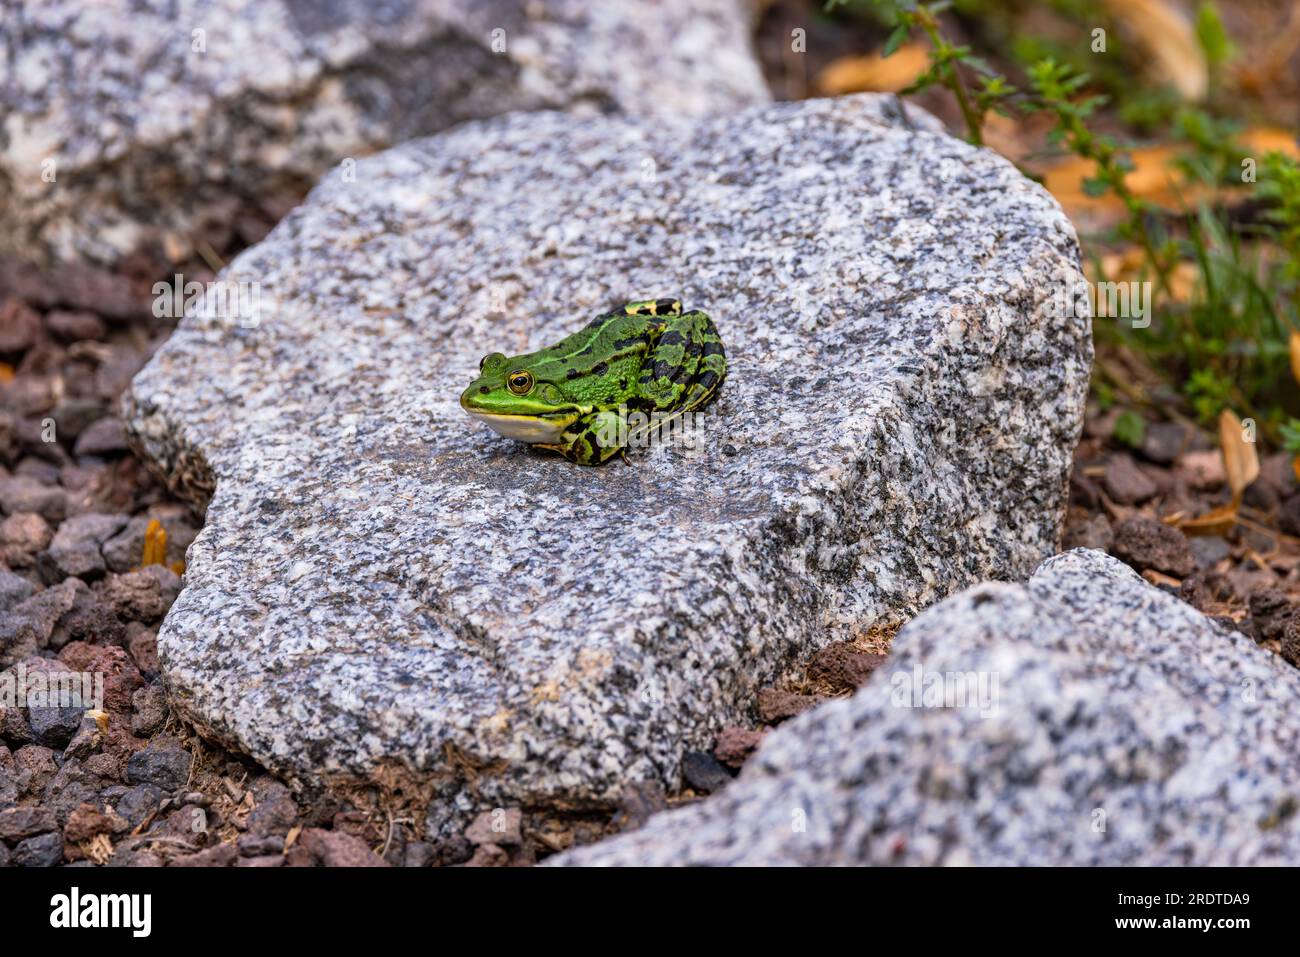 A green pond frog sits waiting on a light stone, Germany Stock Photo